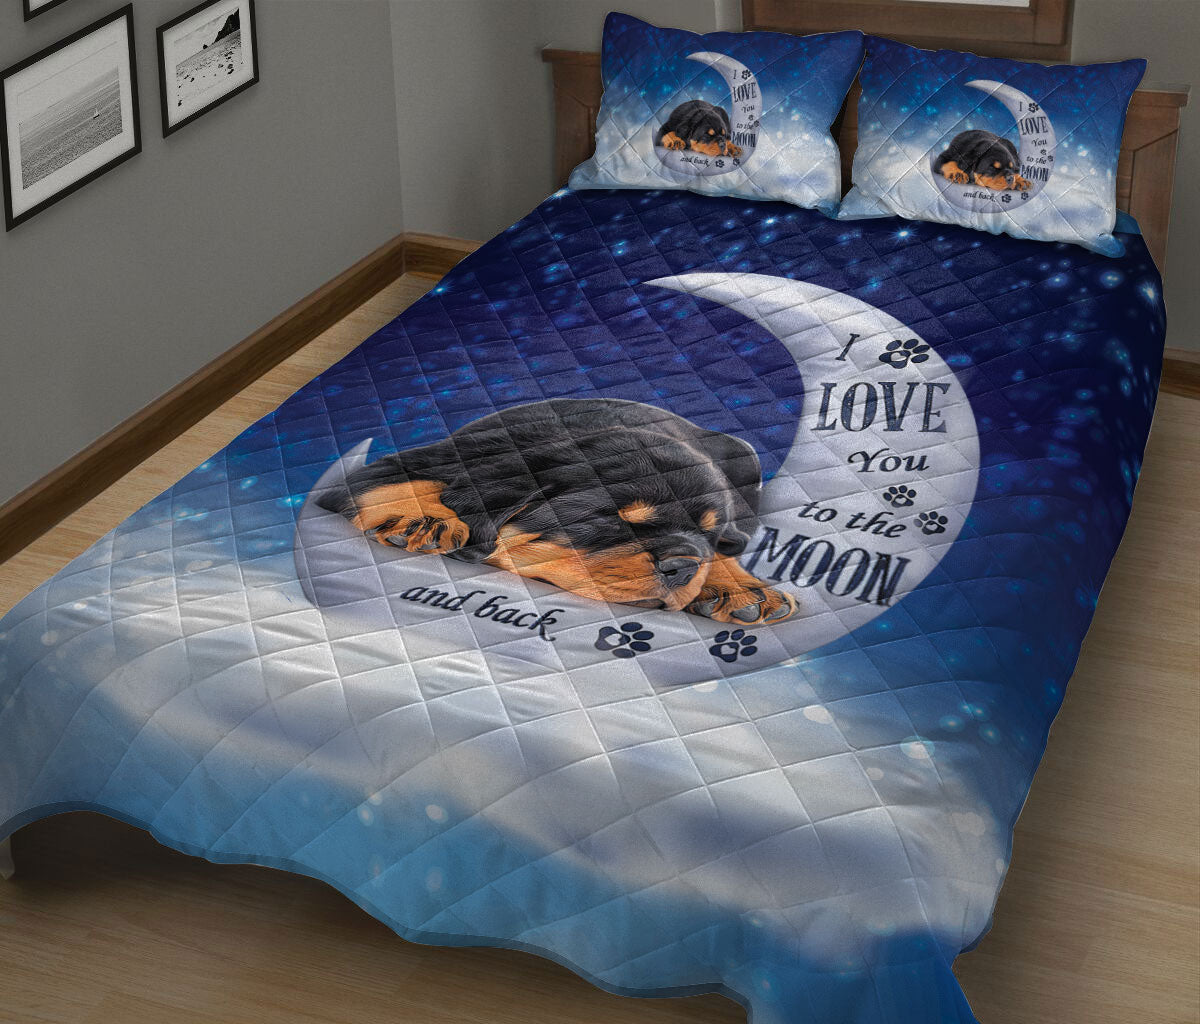 Ohaprints-Quilt-Bed-Set-Pillowcase-Rottweiler-Dog-I-Love-You-To-The-Moon-And-Back-Gift-For-Dog-Puppy-Lover-Blanket-Bedspread-Bedding-242-King (90'' x 100'')